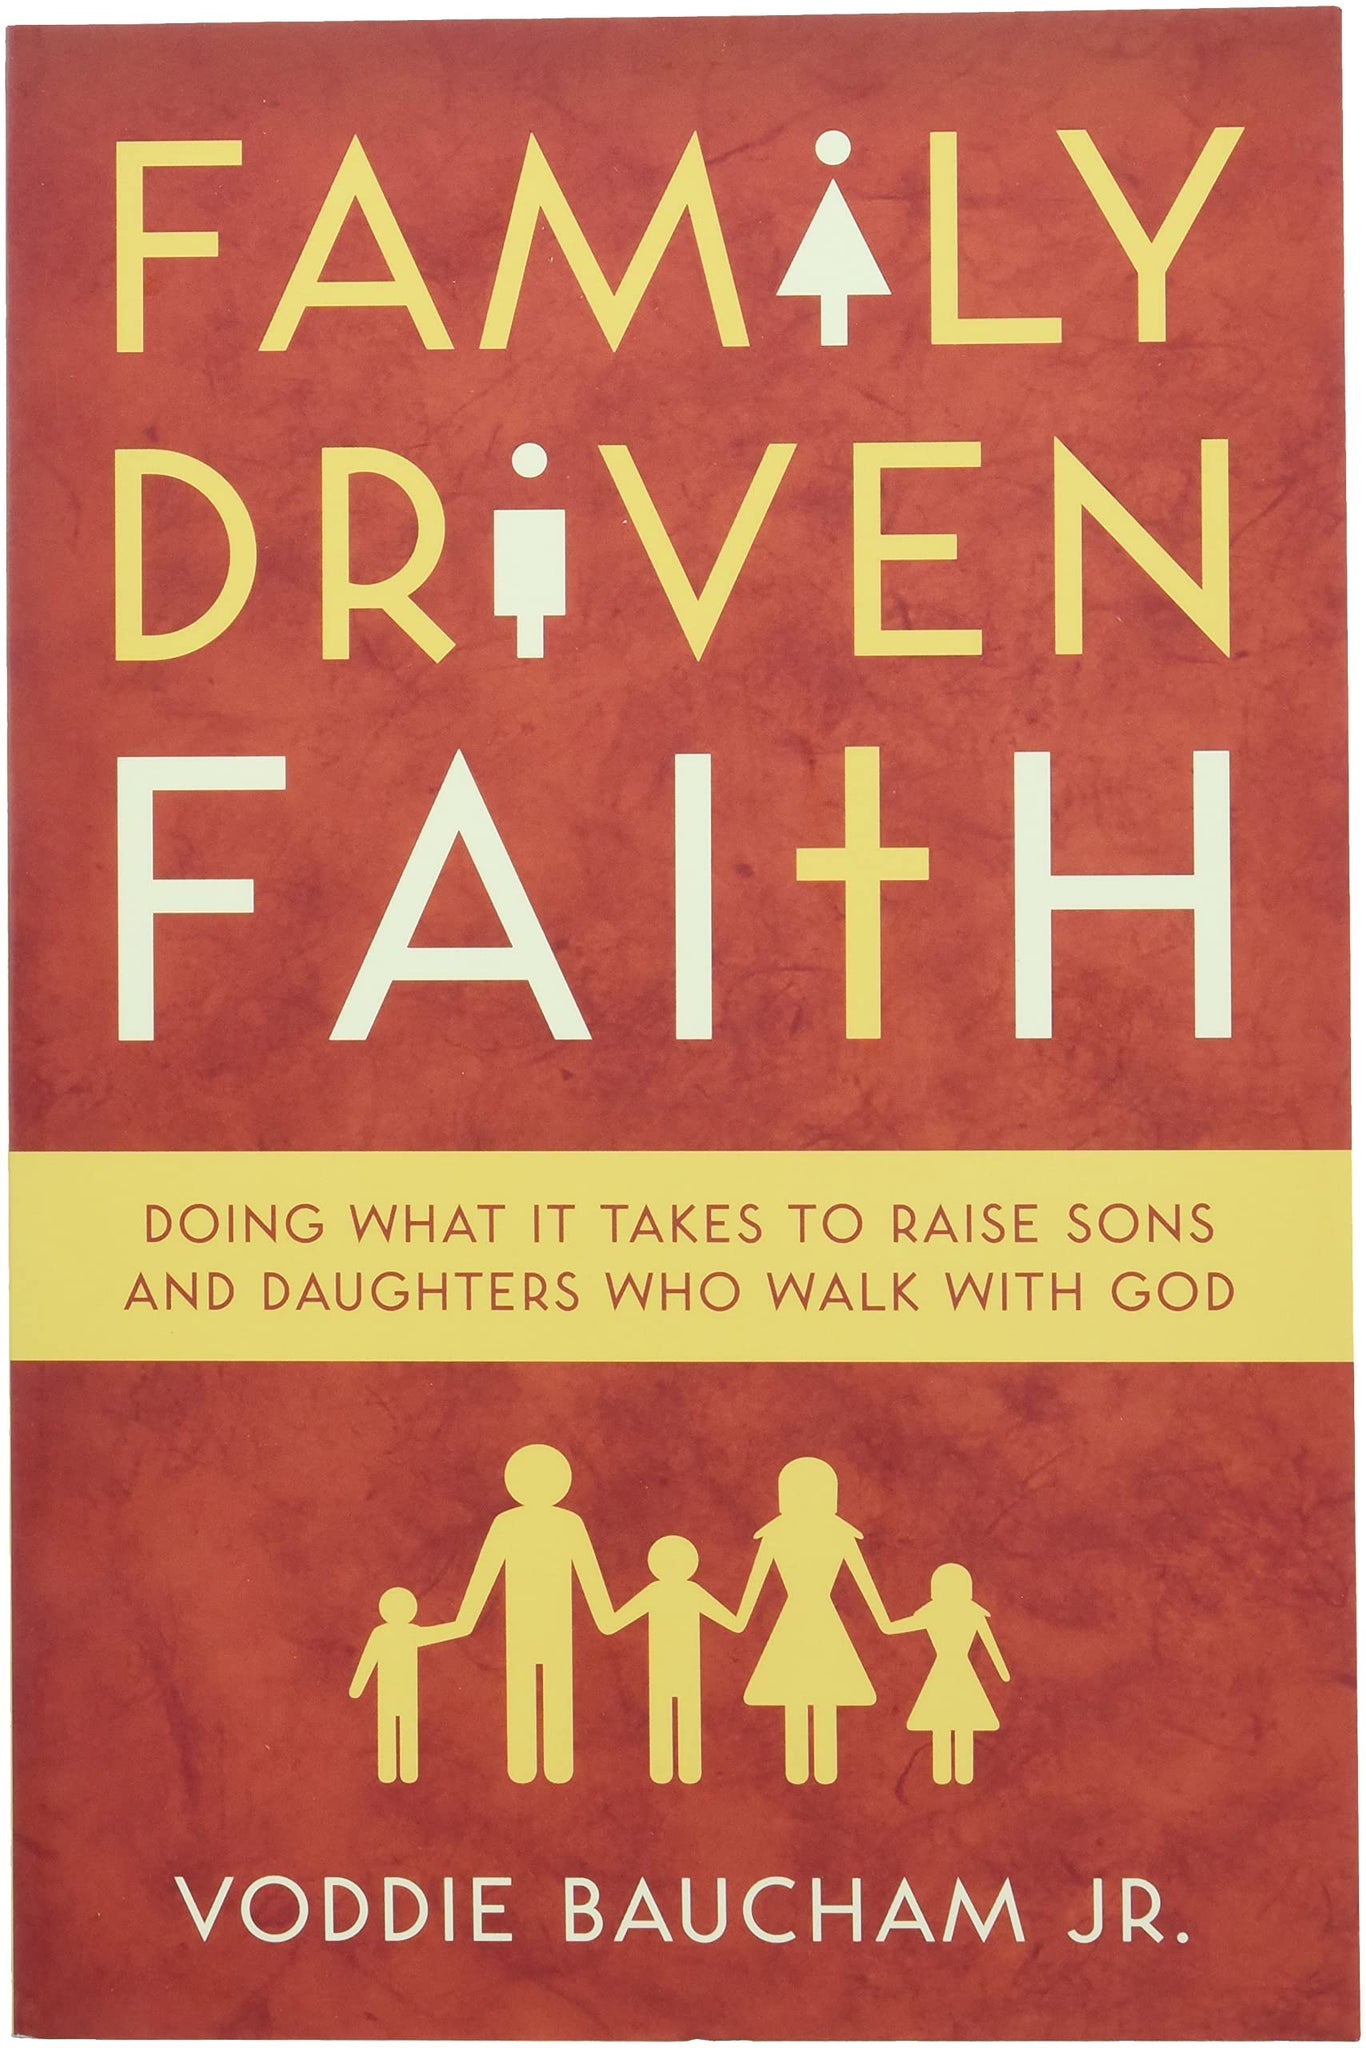 Family Driven Faith: Doing What It Takes to Raise Sons and Daughters Who Walk with God: Voddie Baucham Jr.